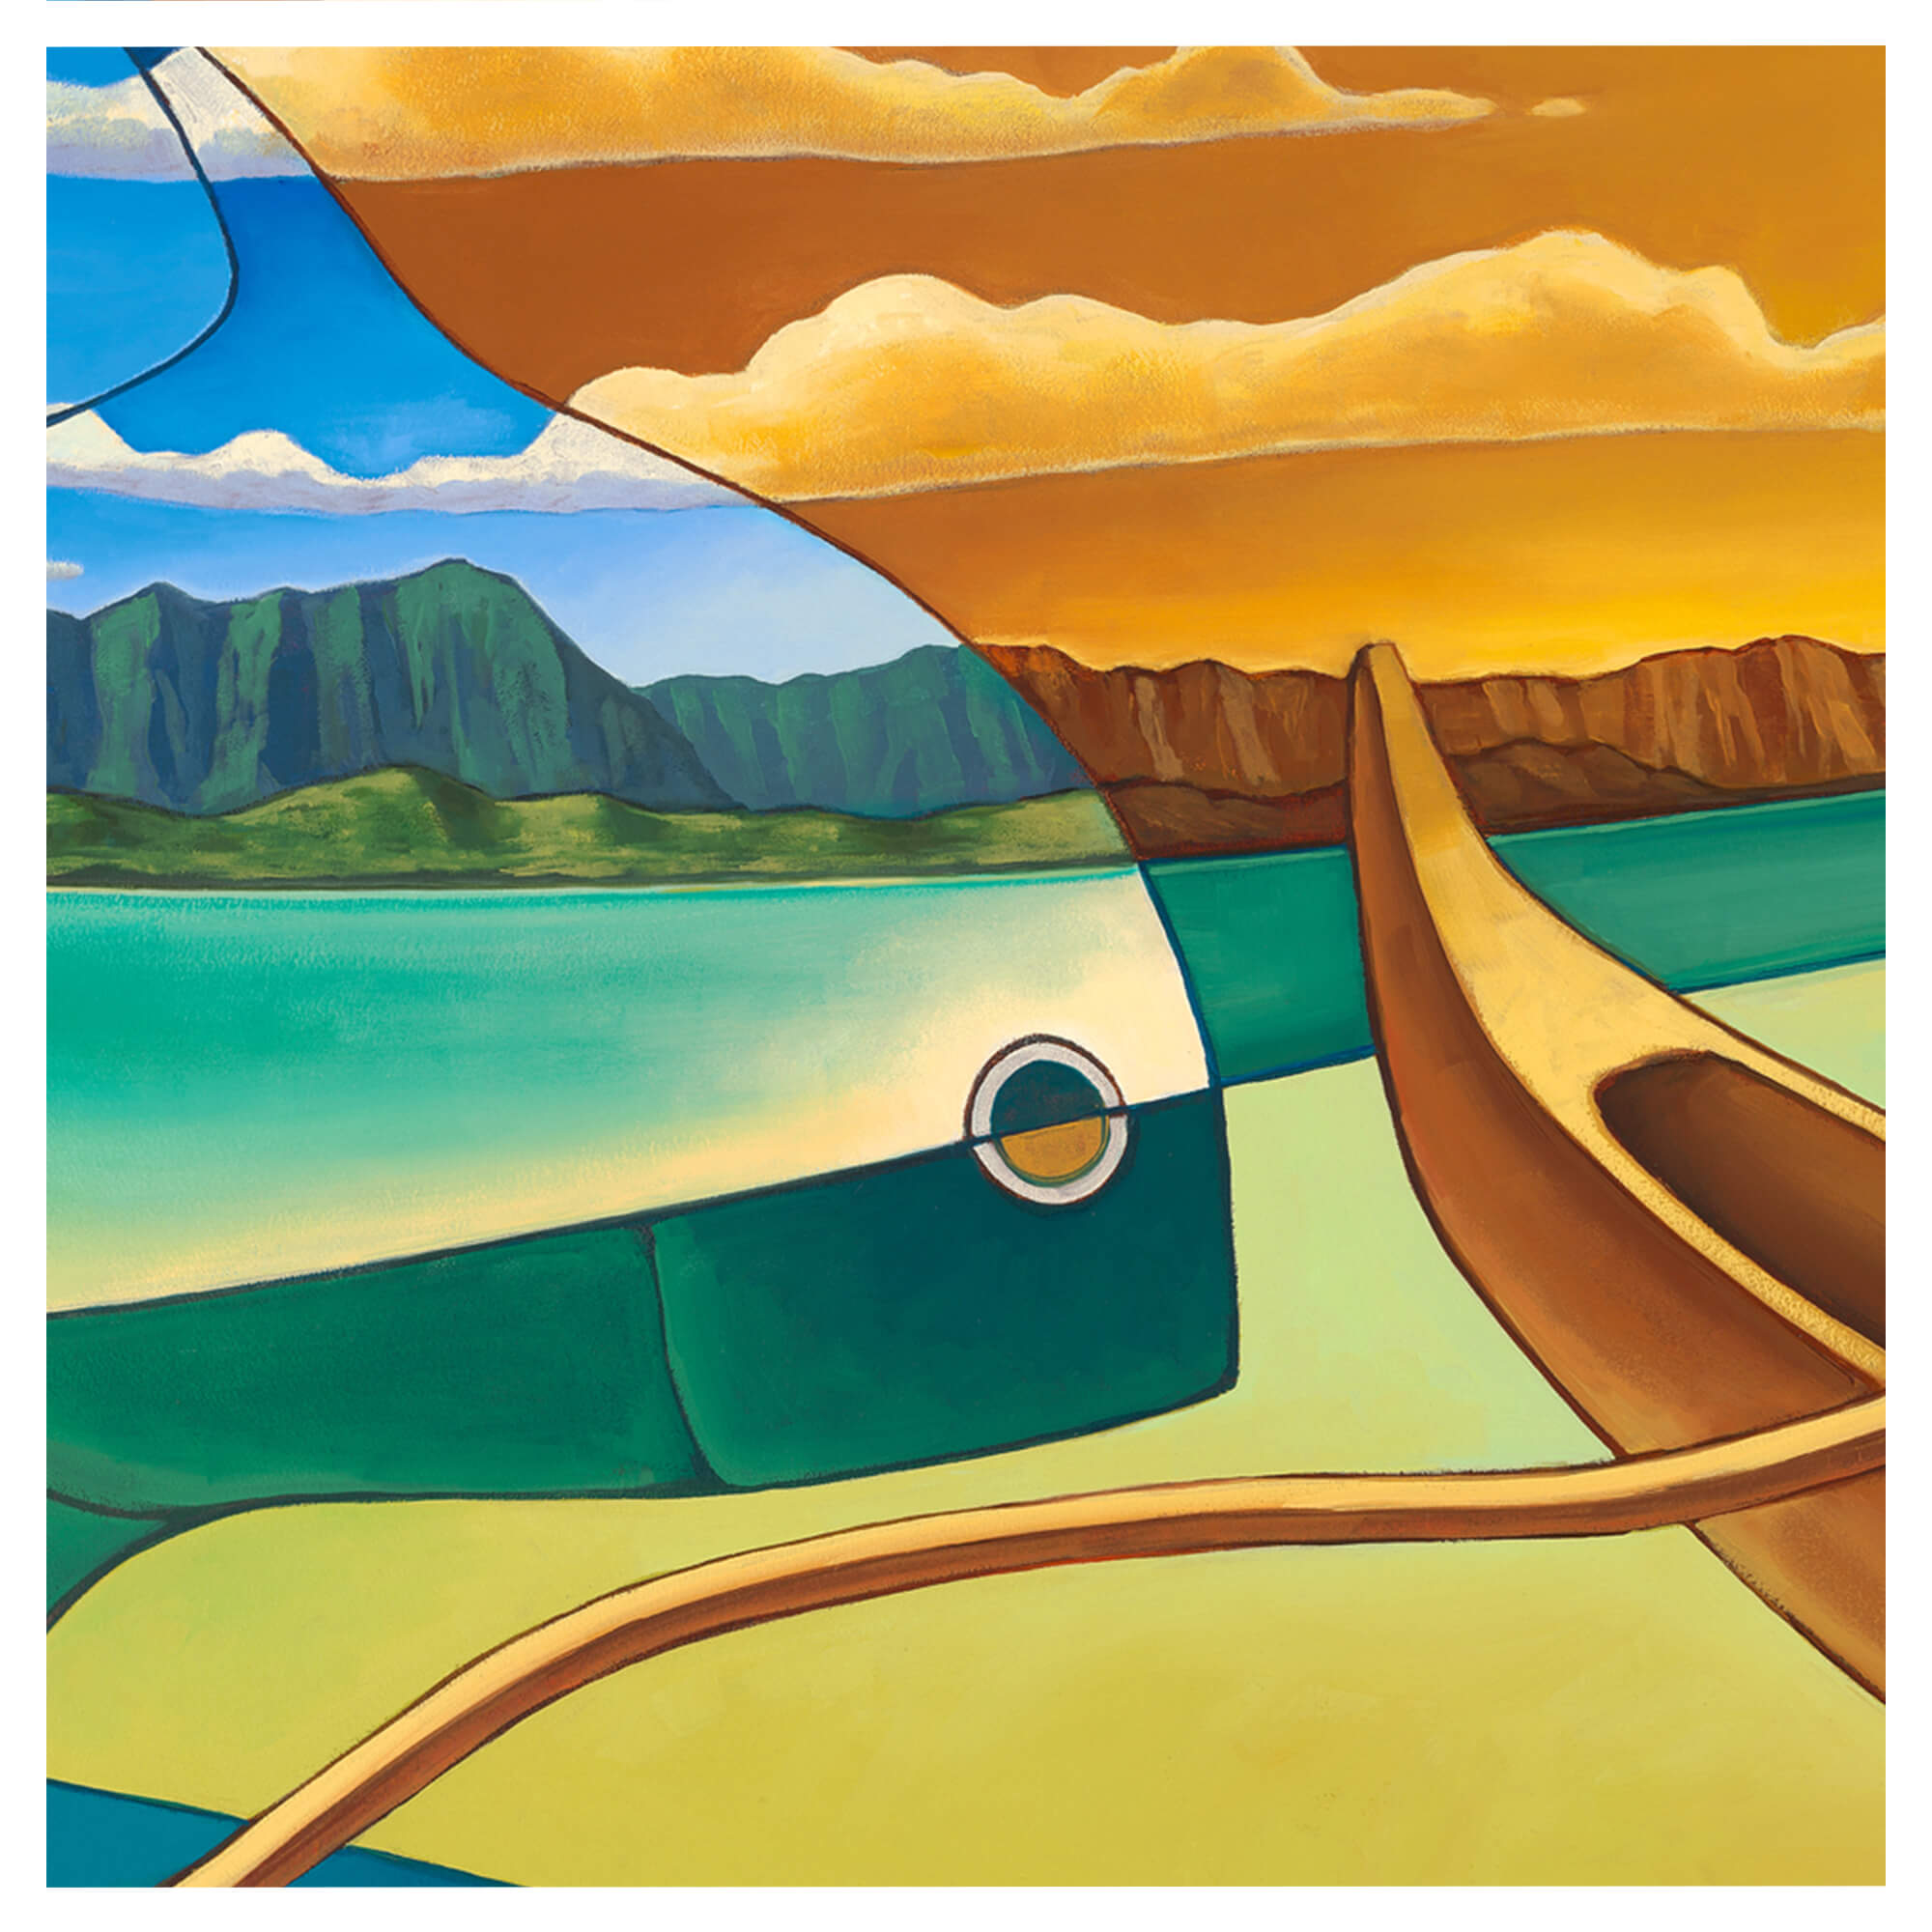 A fish and canoe by Hawaii artist Colin Redican